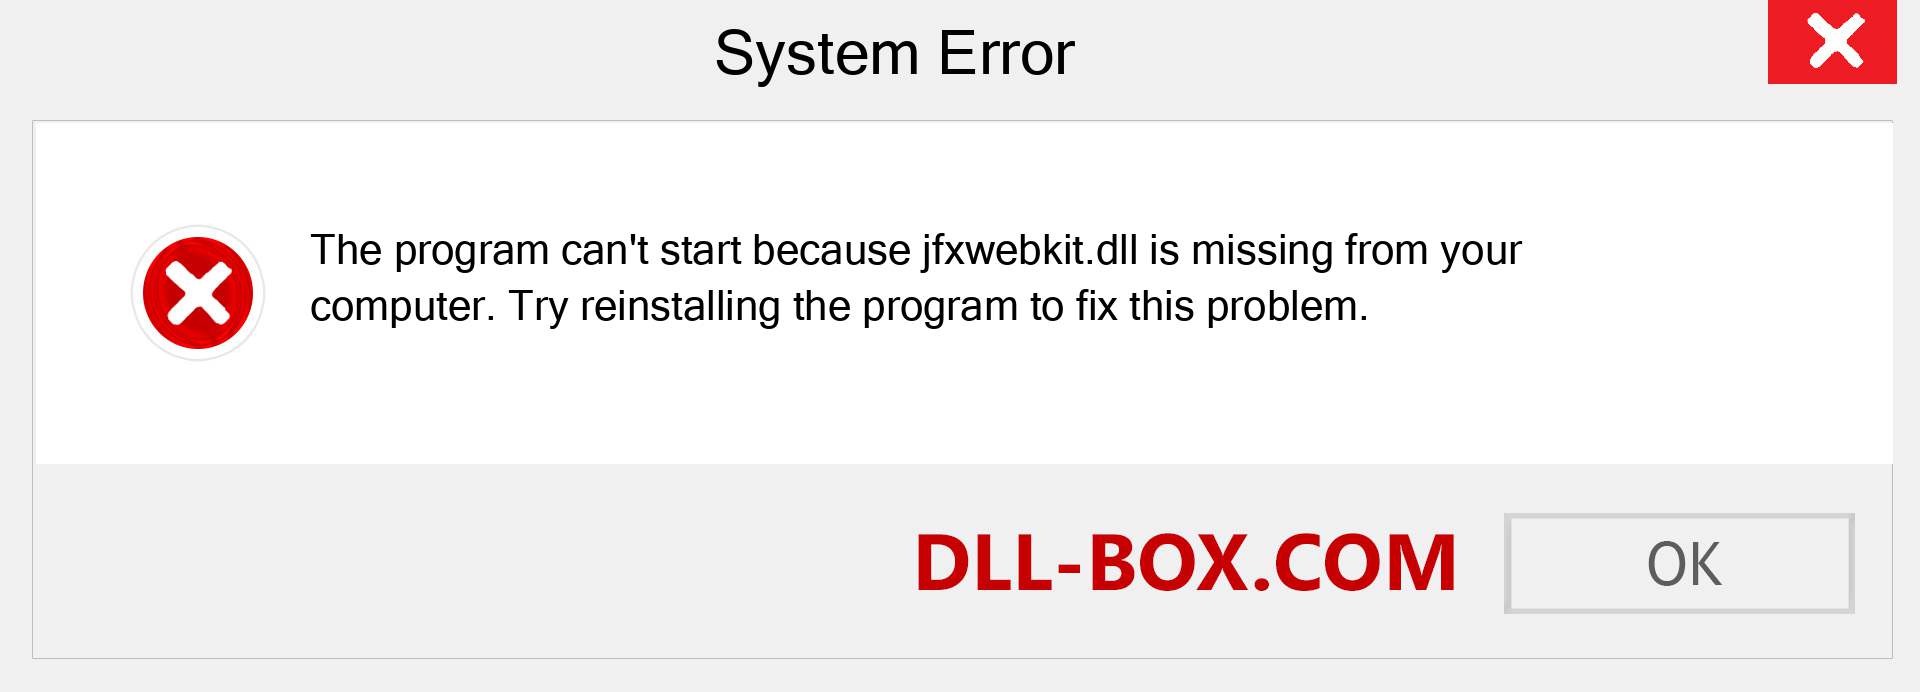  jfxwebkit.dll file is missing?. Download for Windows 7, 8, 10 - Fix  jfxwebkit dll Missing Error on Windows, photos, images